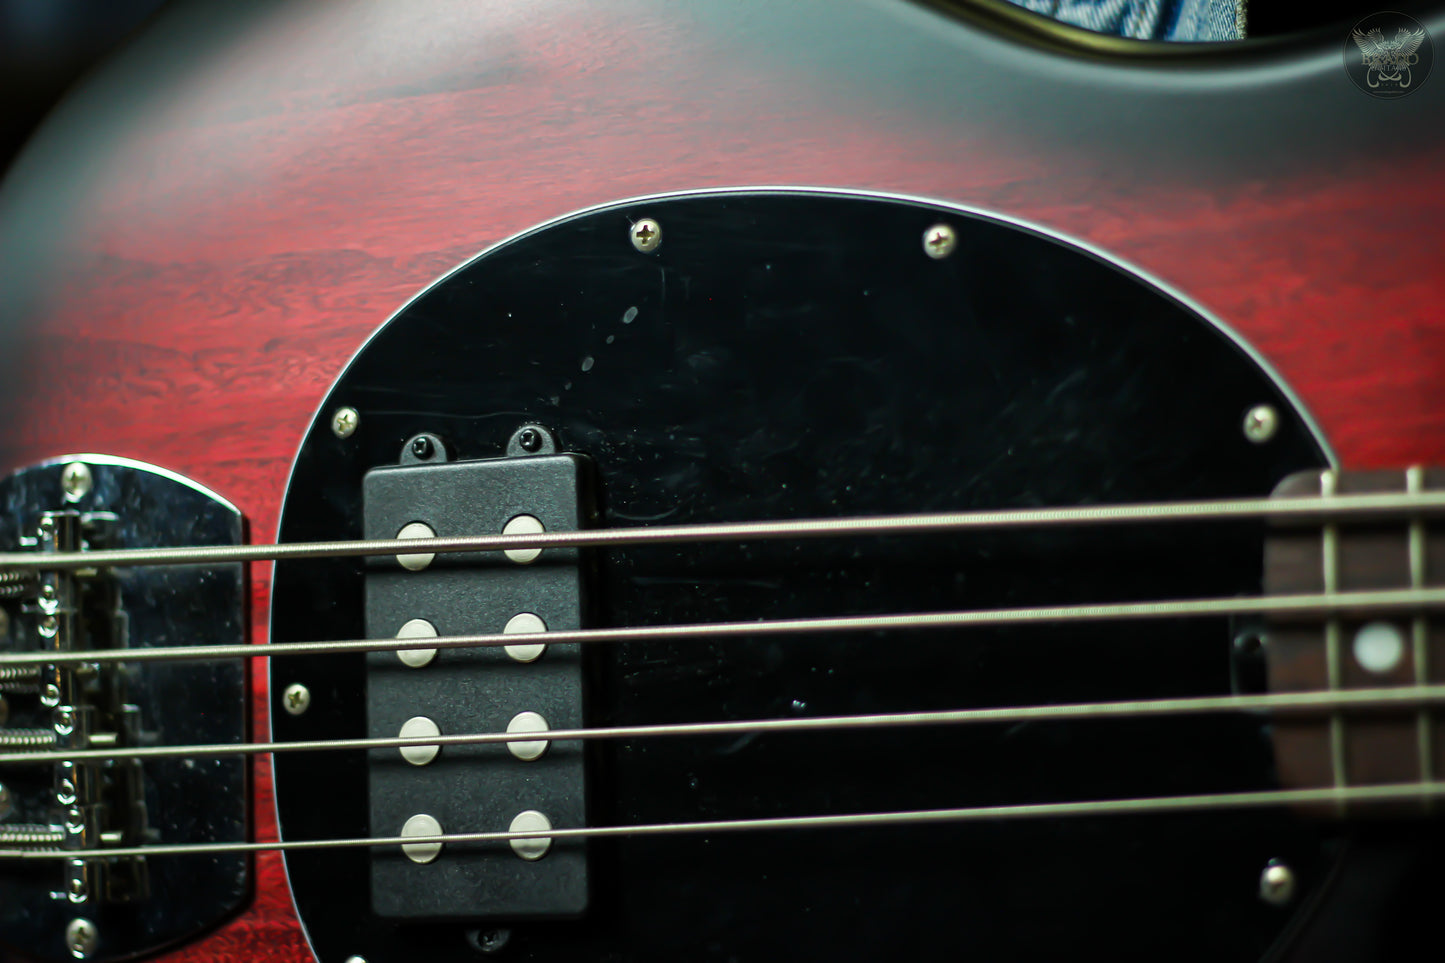 STERLING STINGRAY RAY4 RUBY RED BURST SATIN ELECTRIC BASS (MINT)